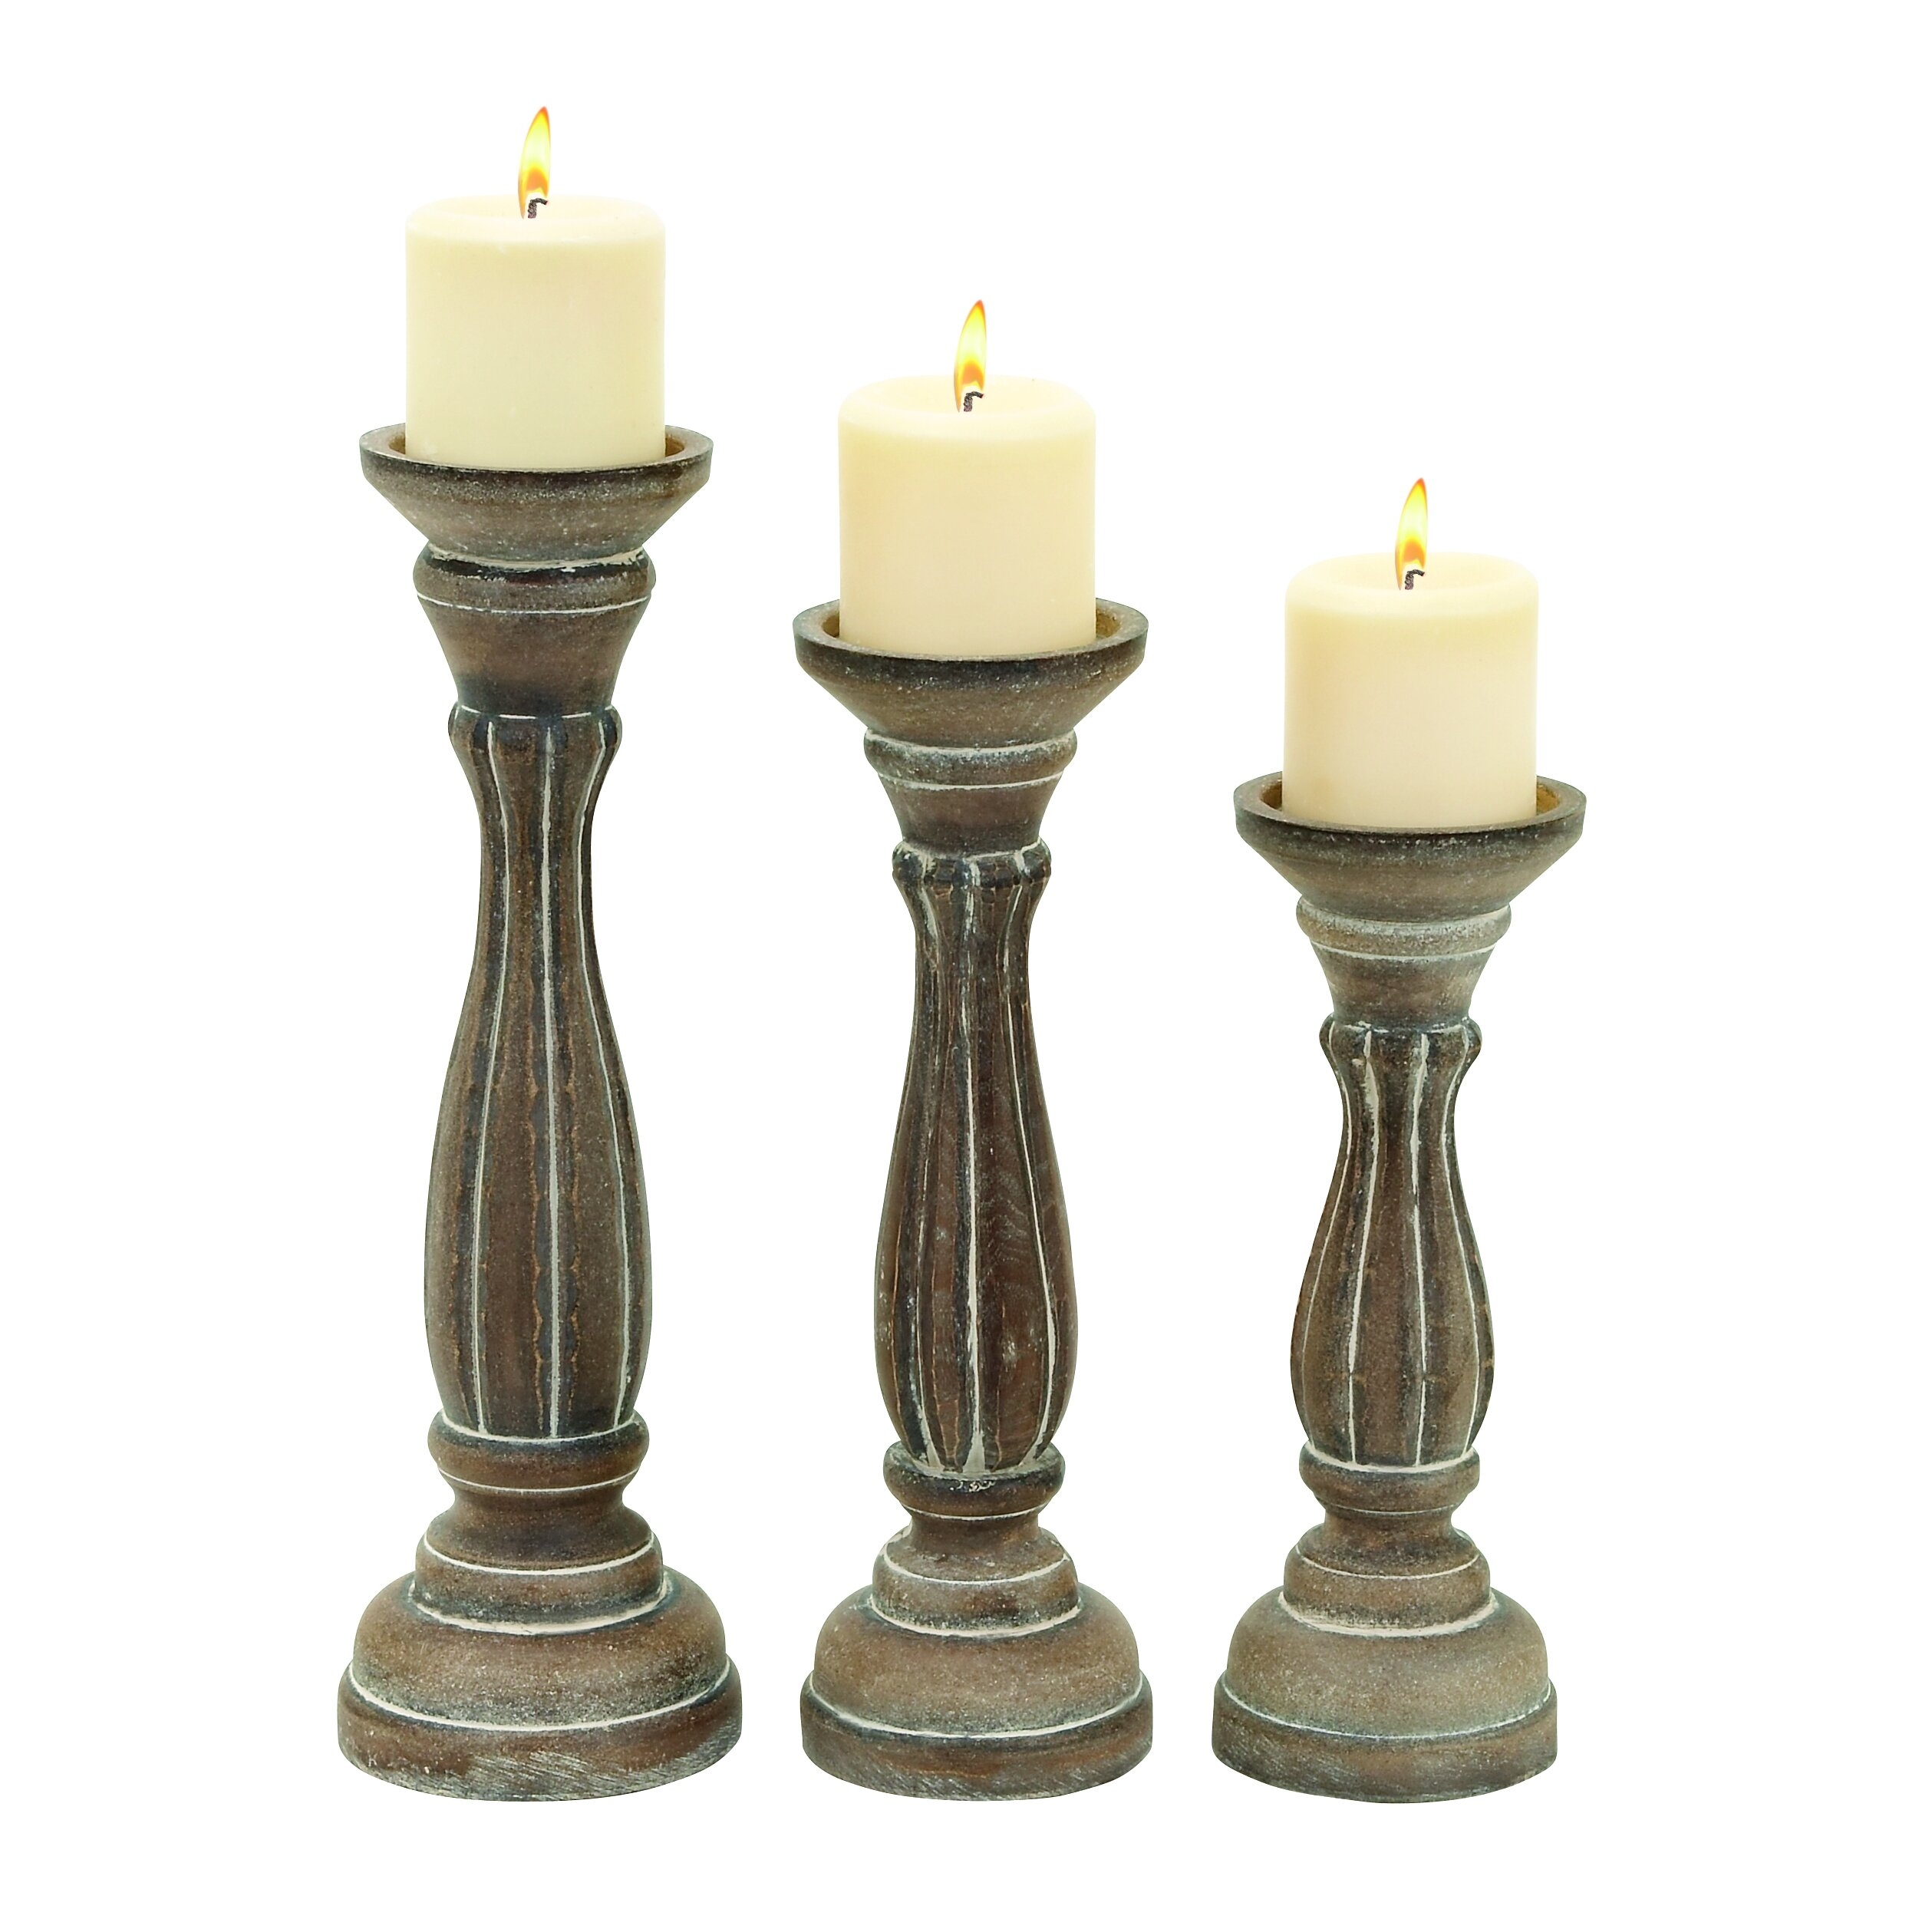 Distressed Hurricane Candlestick Candle Holders Prefer Centerpieces for Christmas Table Mantle Fireplace Decoration Sziqiqi Vintage Christmas Candle Holders Metal Pillar Candle Holders Set of 2 Star